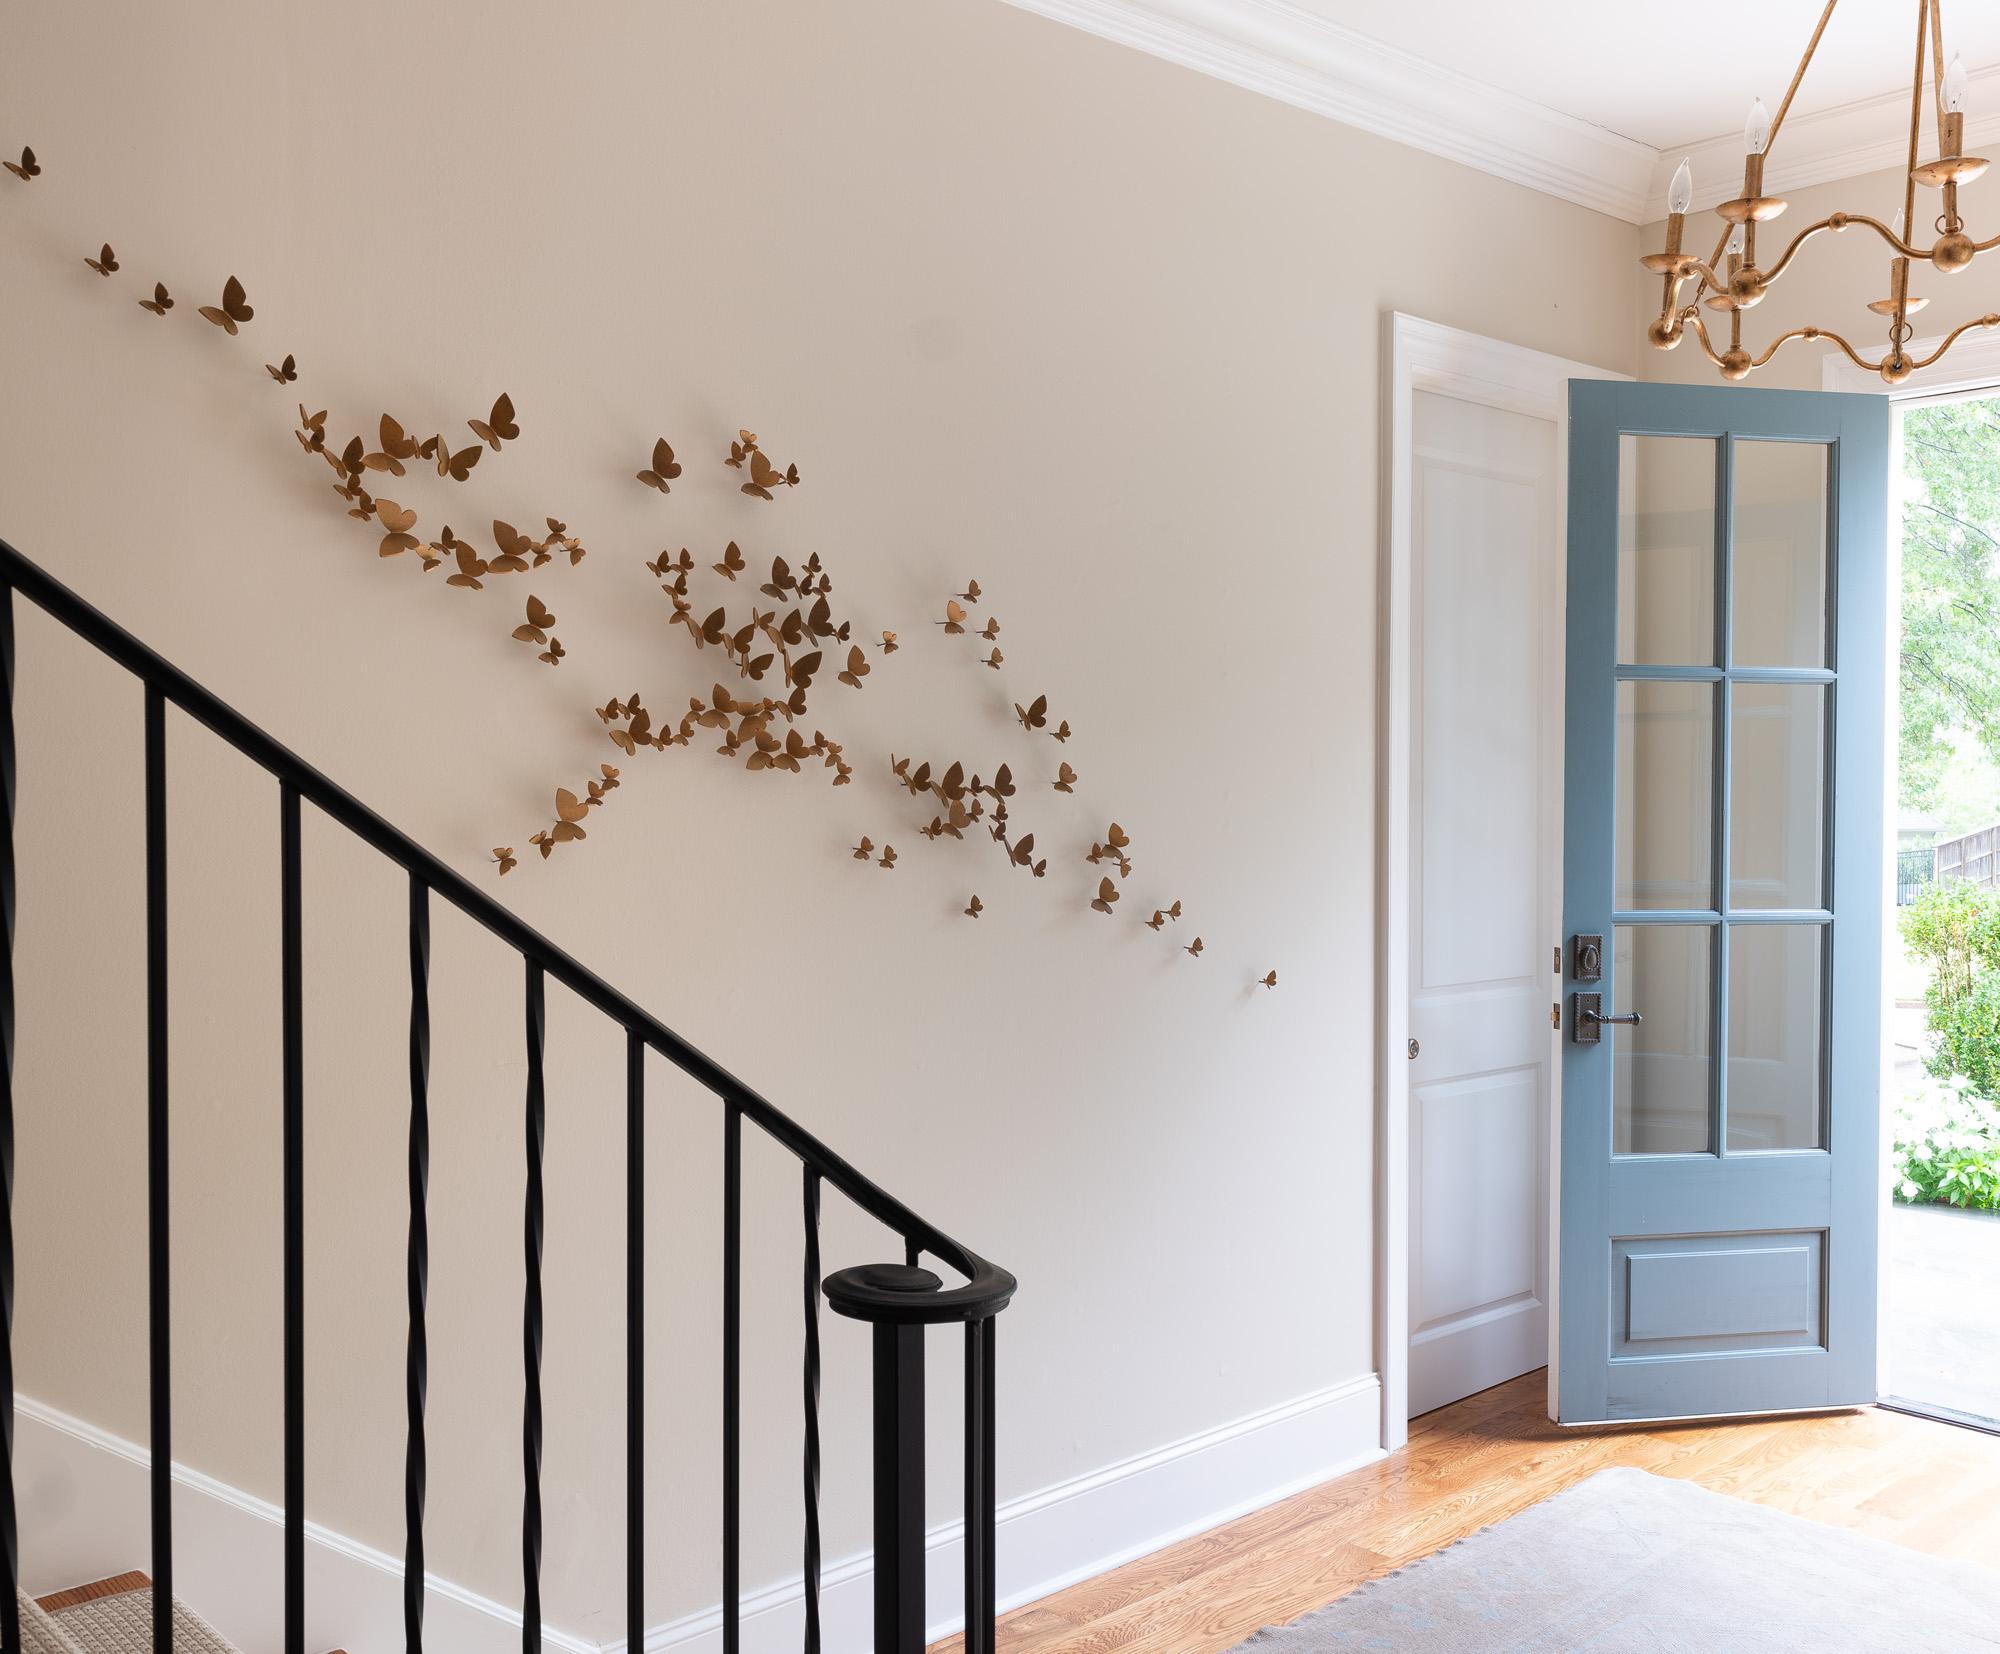 The versatility of our butterfly composition explains why this fanciful grouping is a favorite among designers. We made envisioning how these whimsical butterflies enhance a space easier to imagine than ever before.

Sizing

Large flight - 100